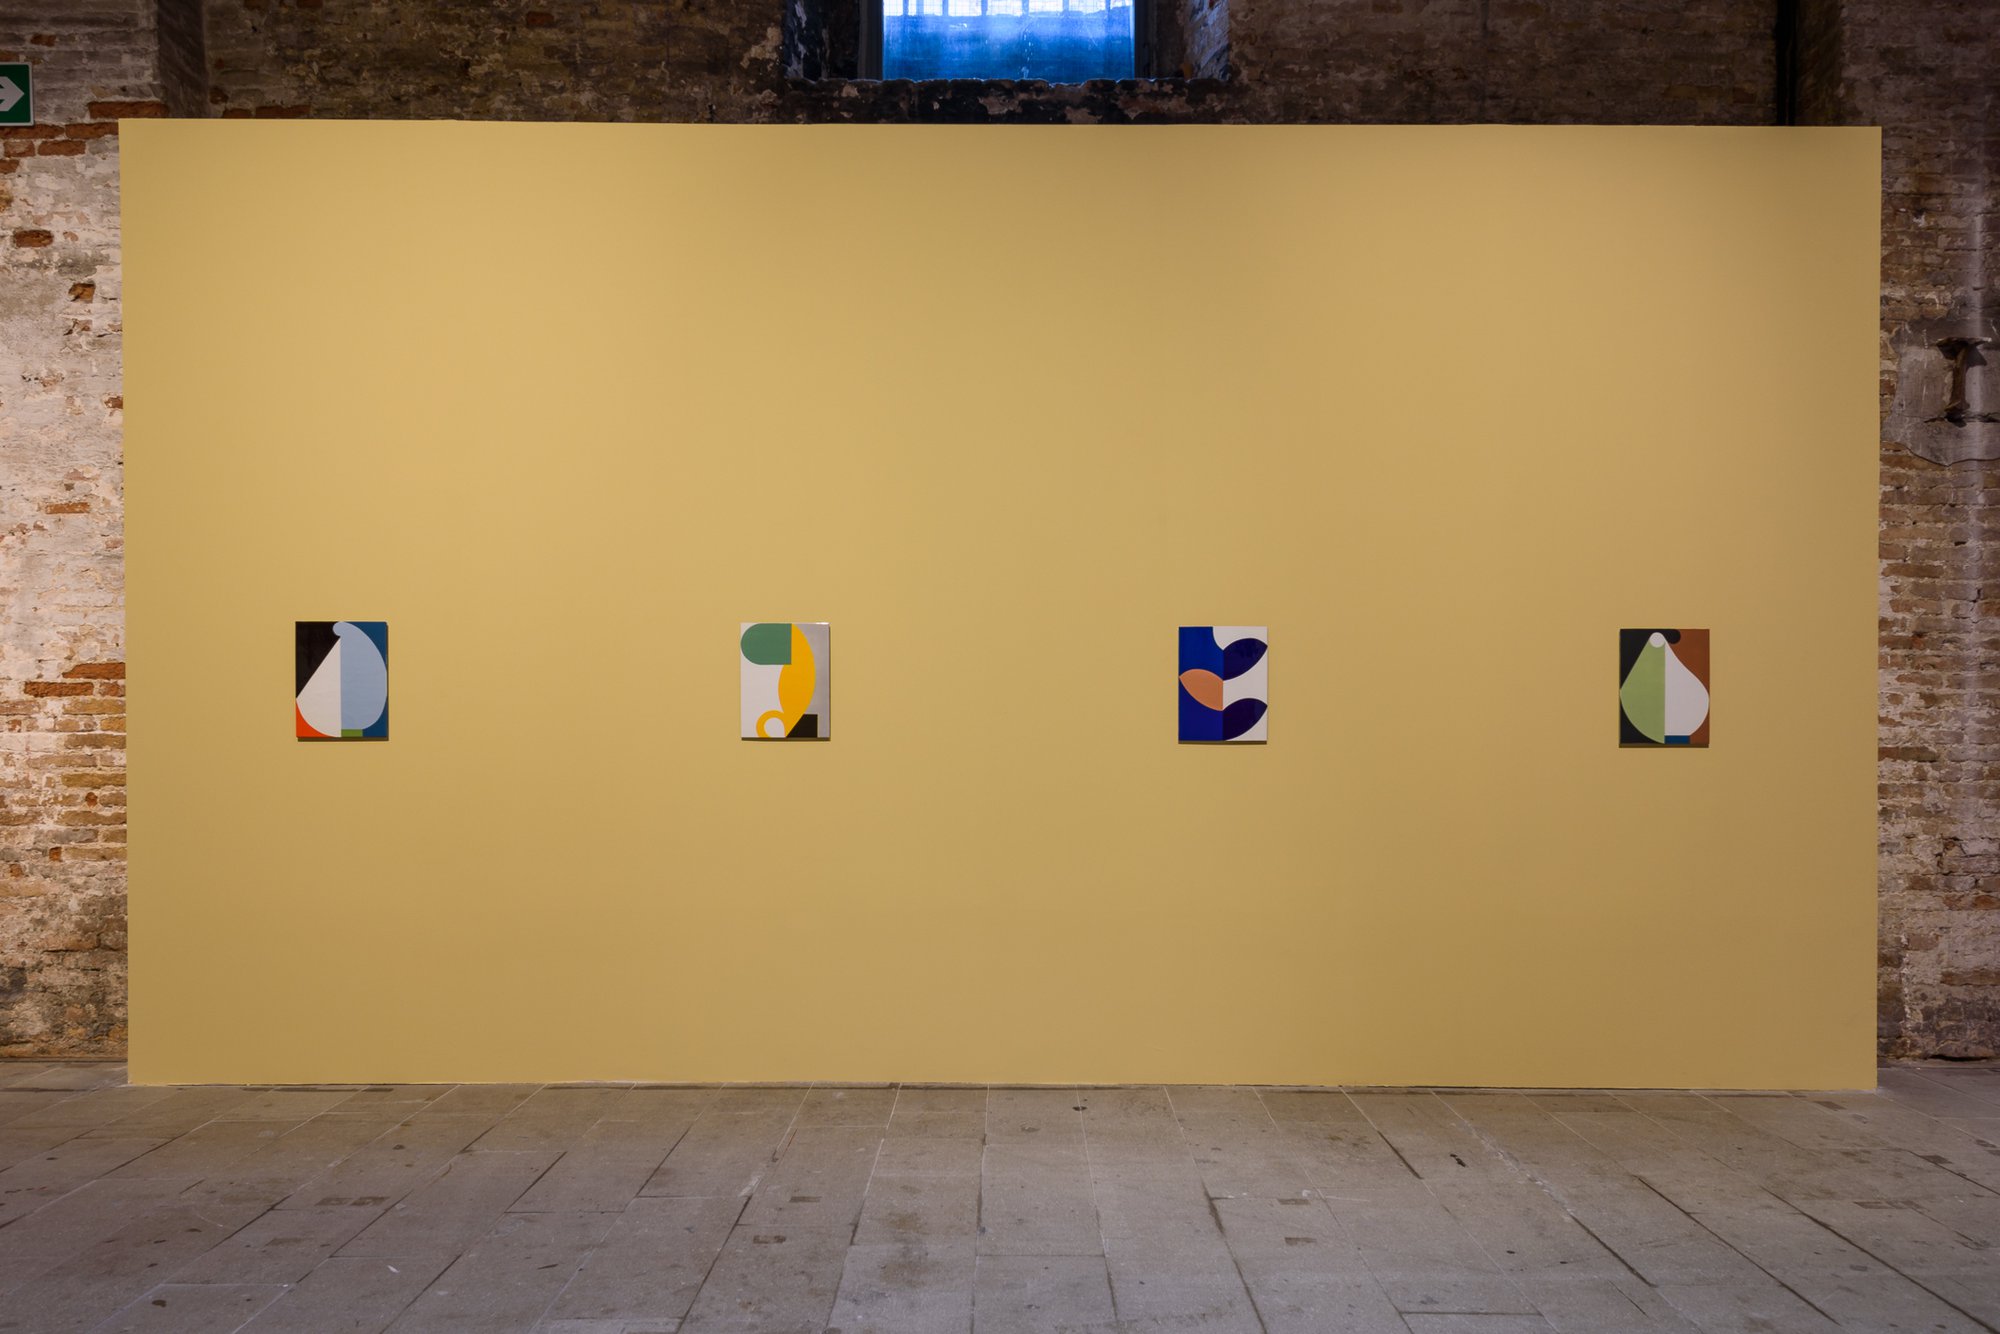 Ulrike Müller, Installation view, May You Live In Interesting Times, The 58th International Art Exhibition, La Biennale di Venezia, Arsenale, Venice, 2019